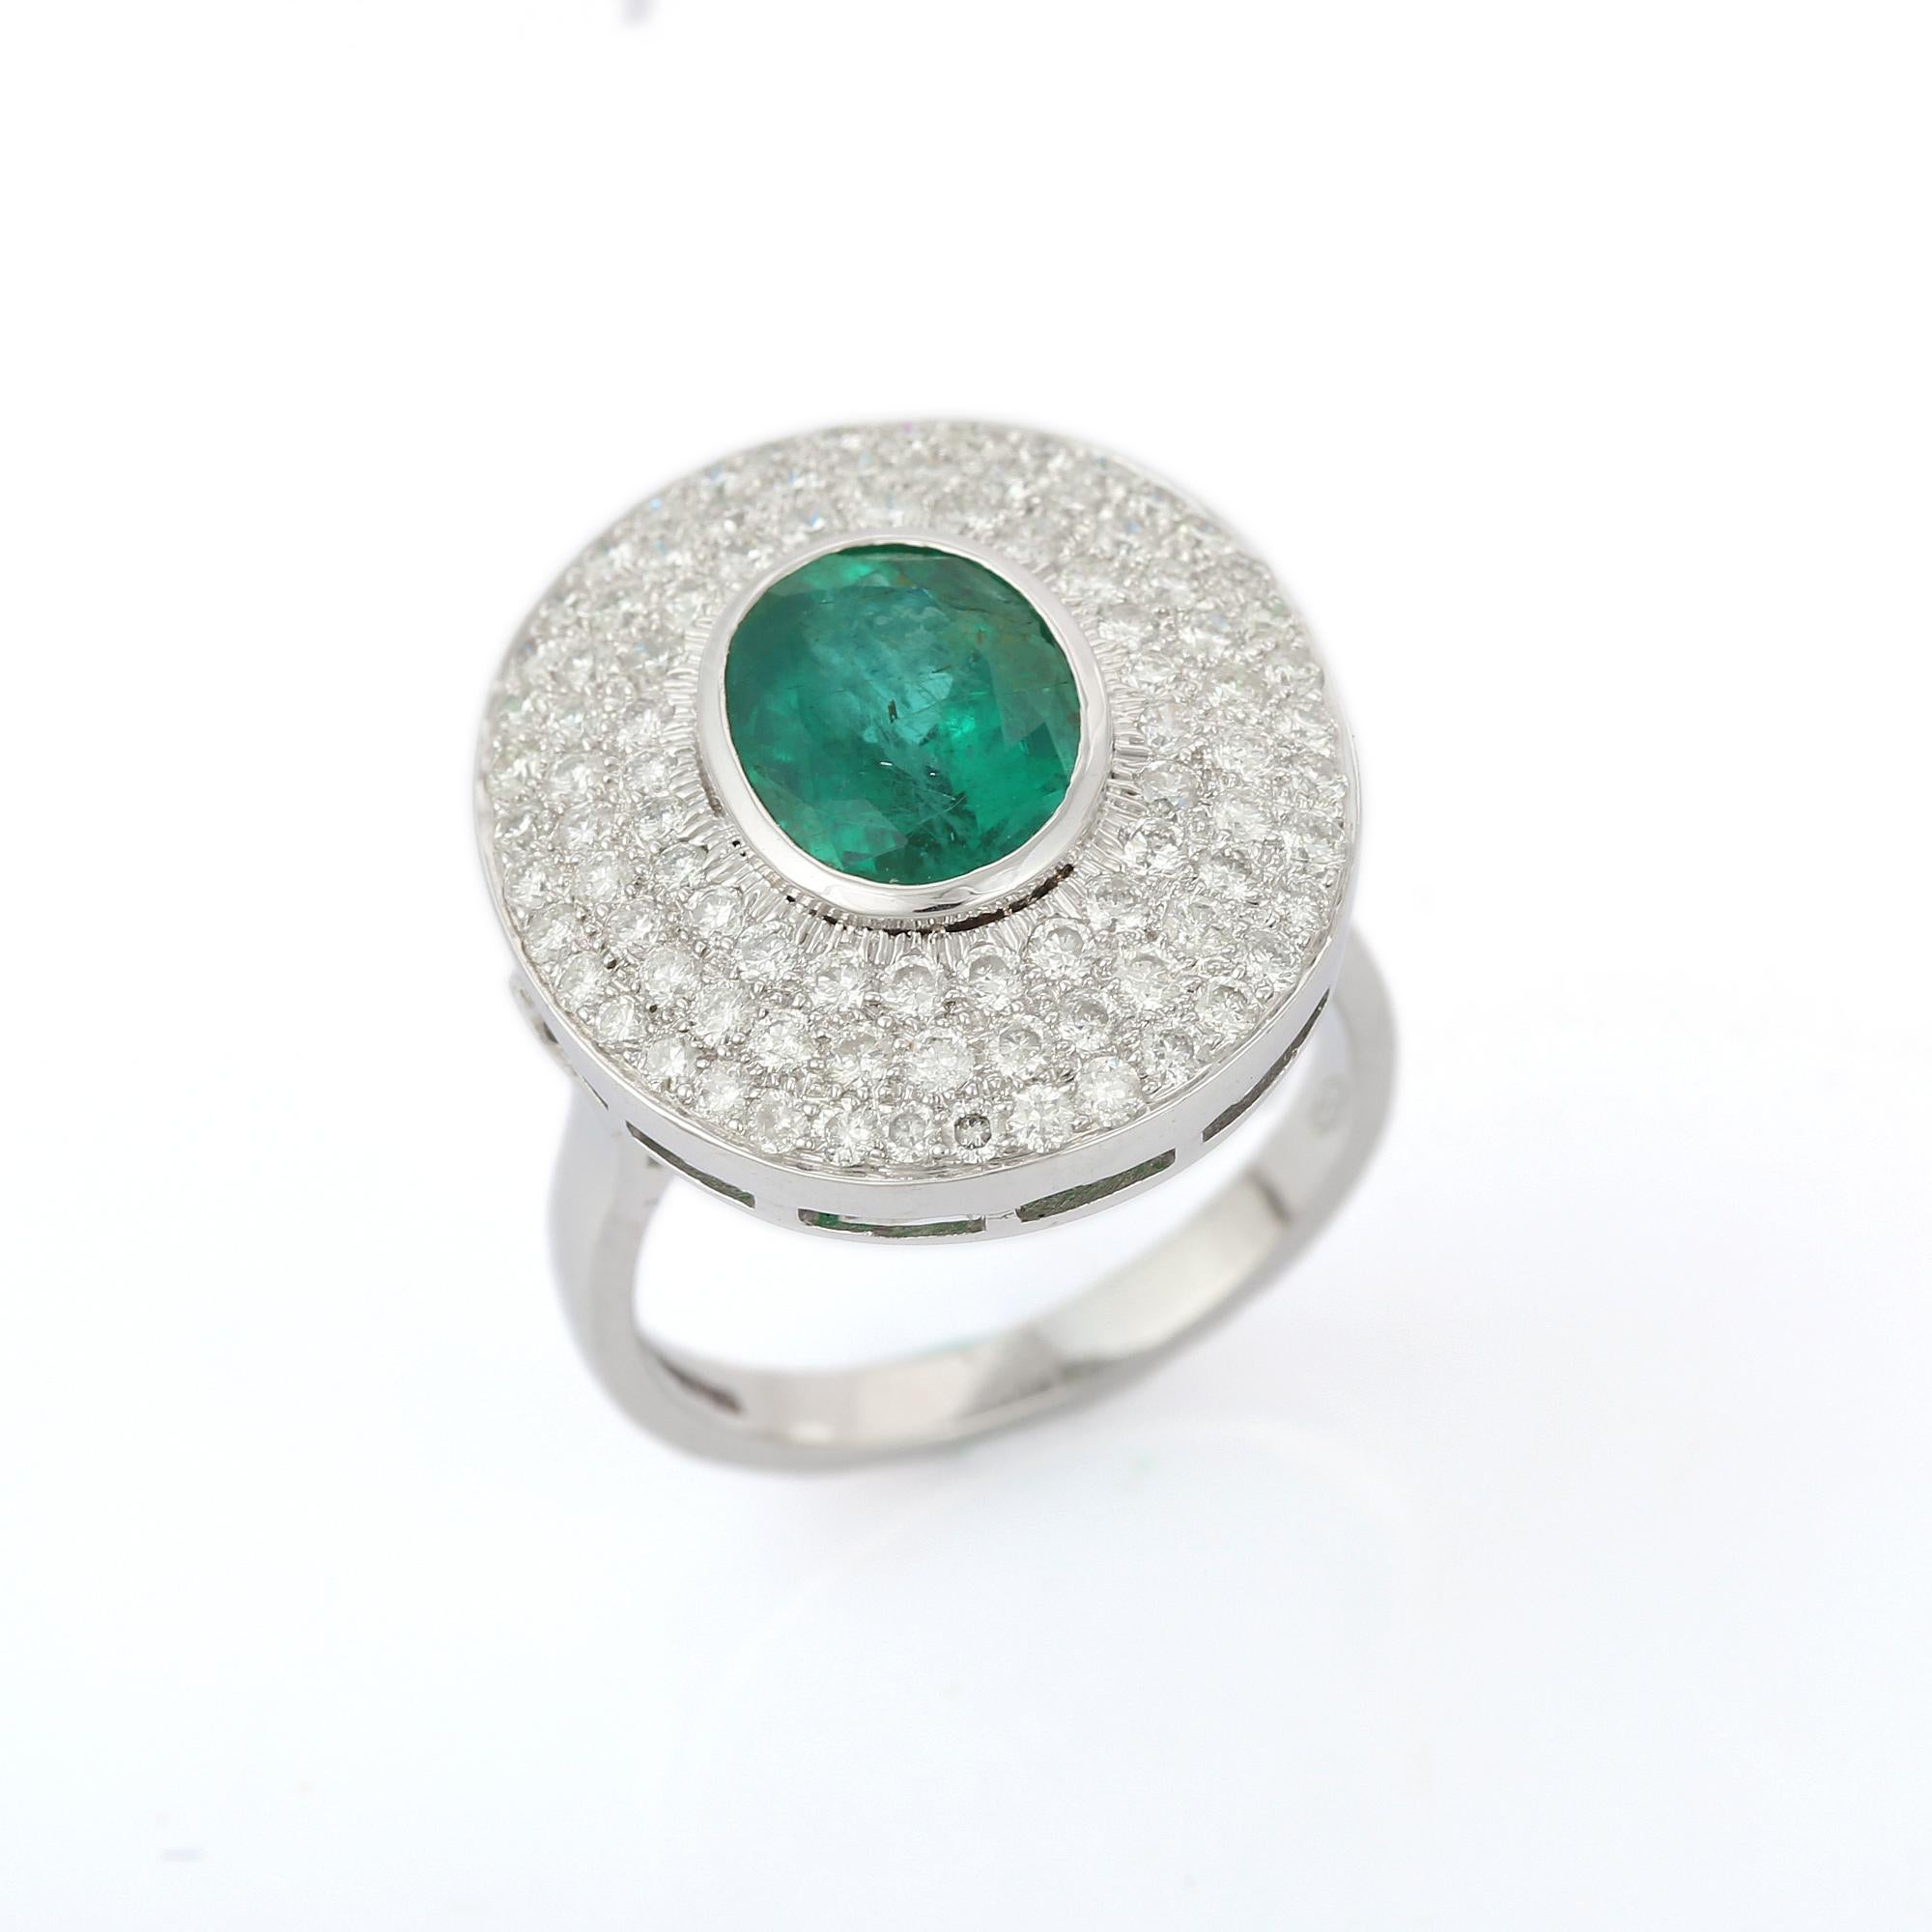 For Sale:  2.88 Carats Oval Emerald and Diamond Cocktail Ring in 18K White Gold 6